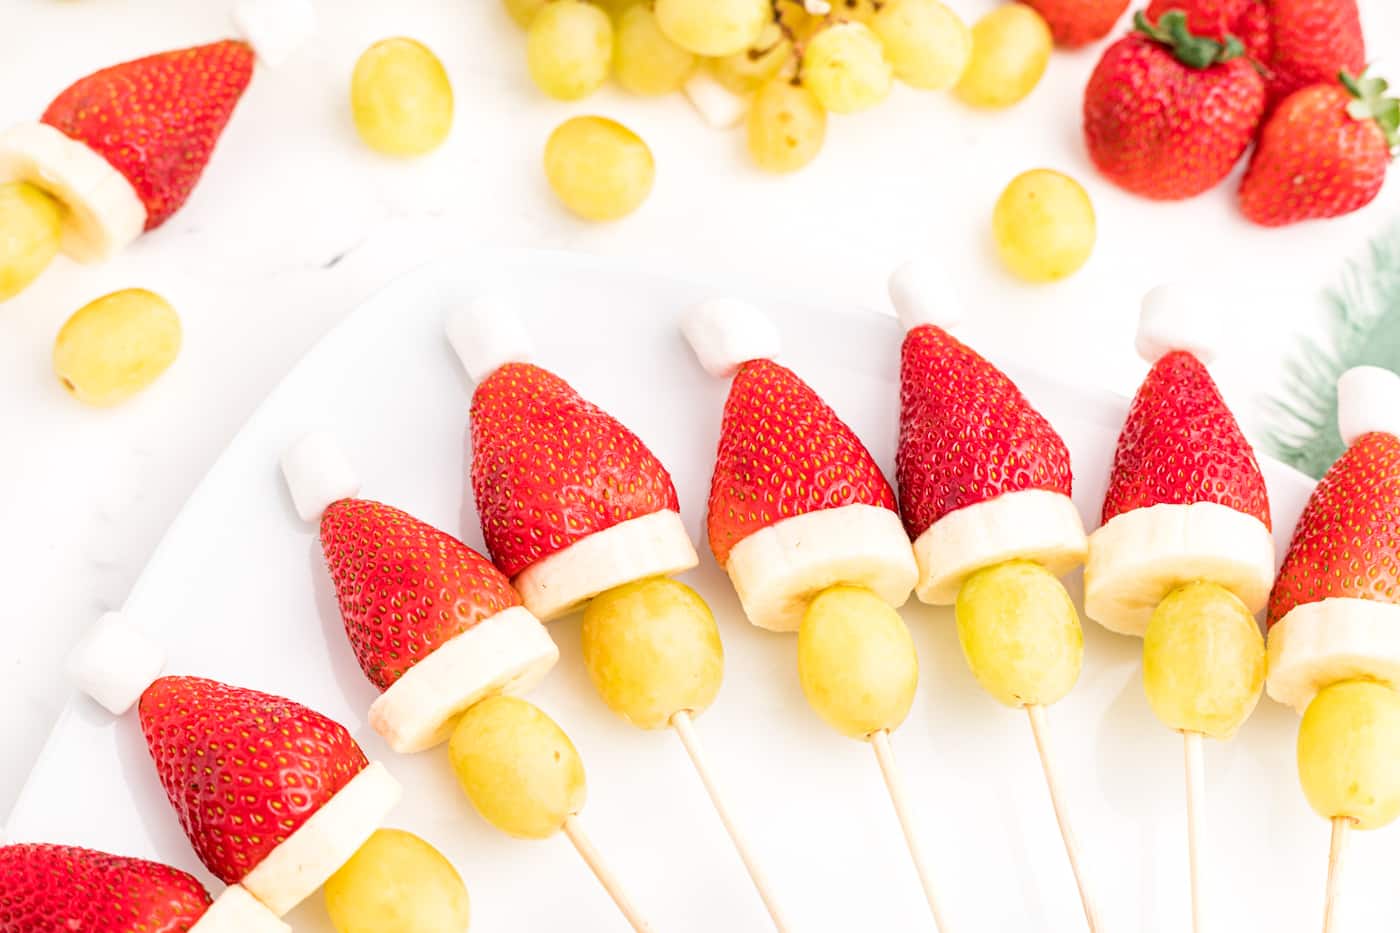 Grinch Kabobs - Recipes From A Pantry